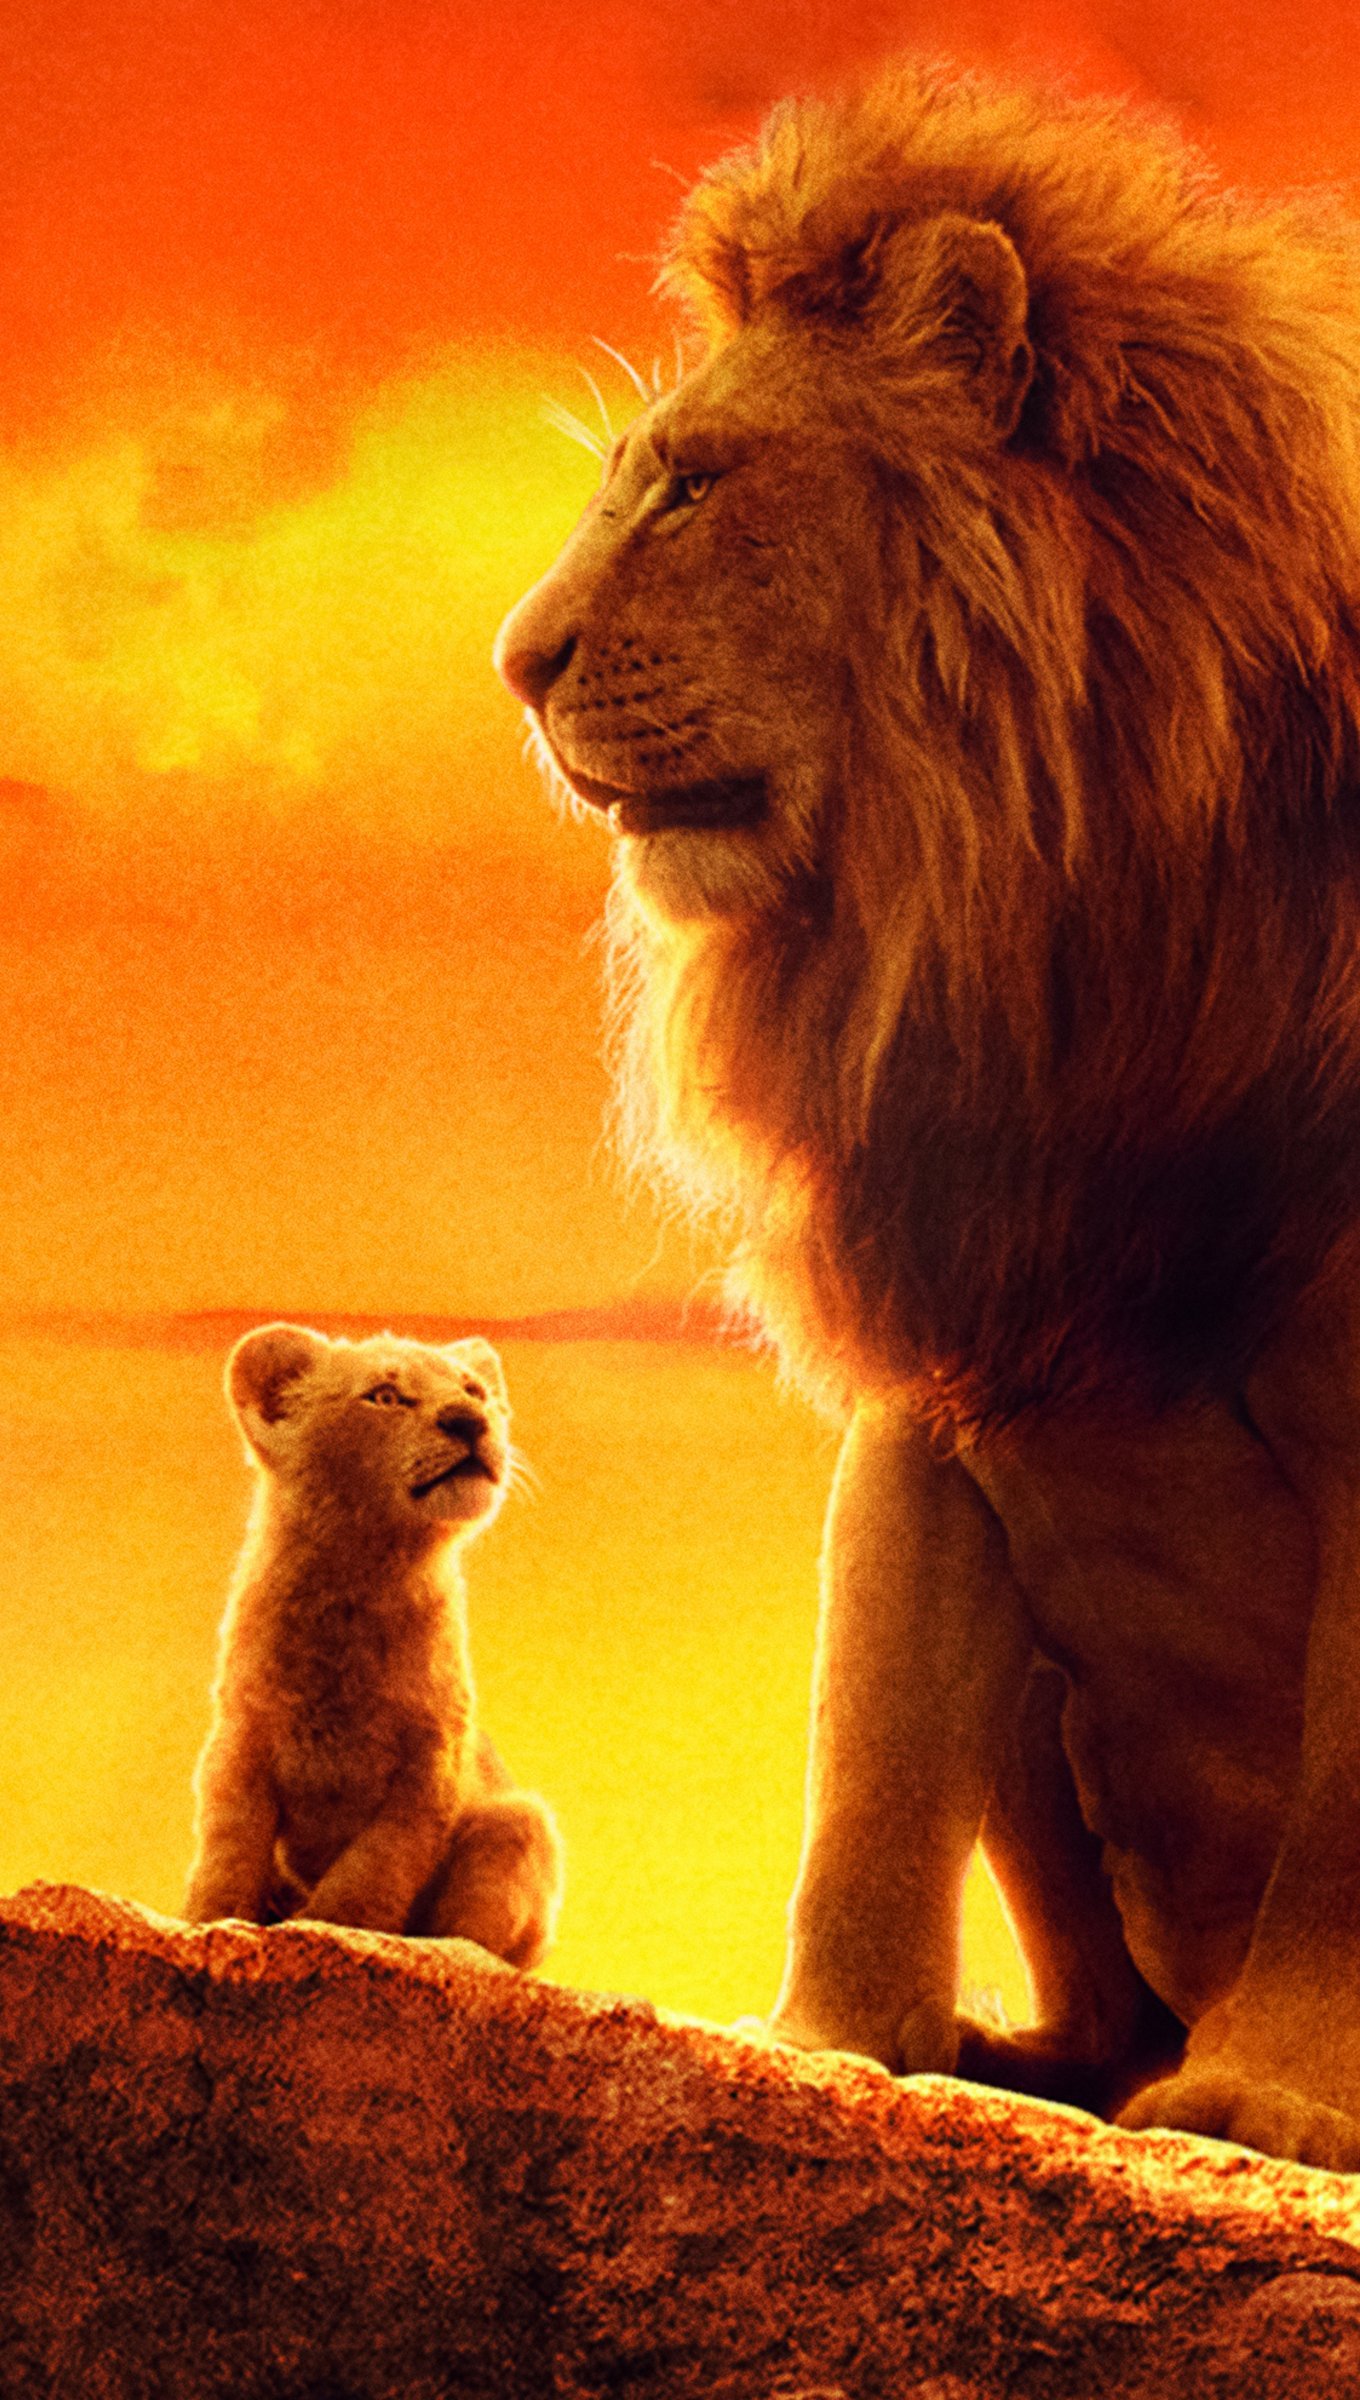 The Lion King (1994) - video Dailymotion